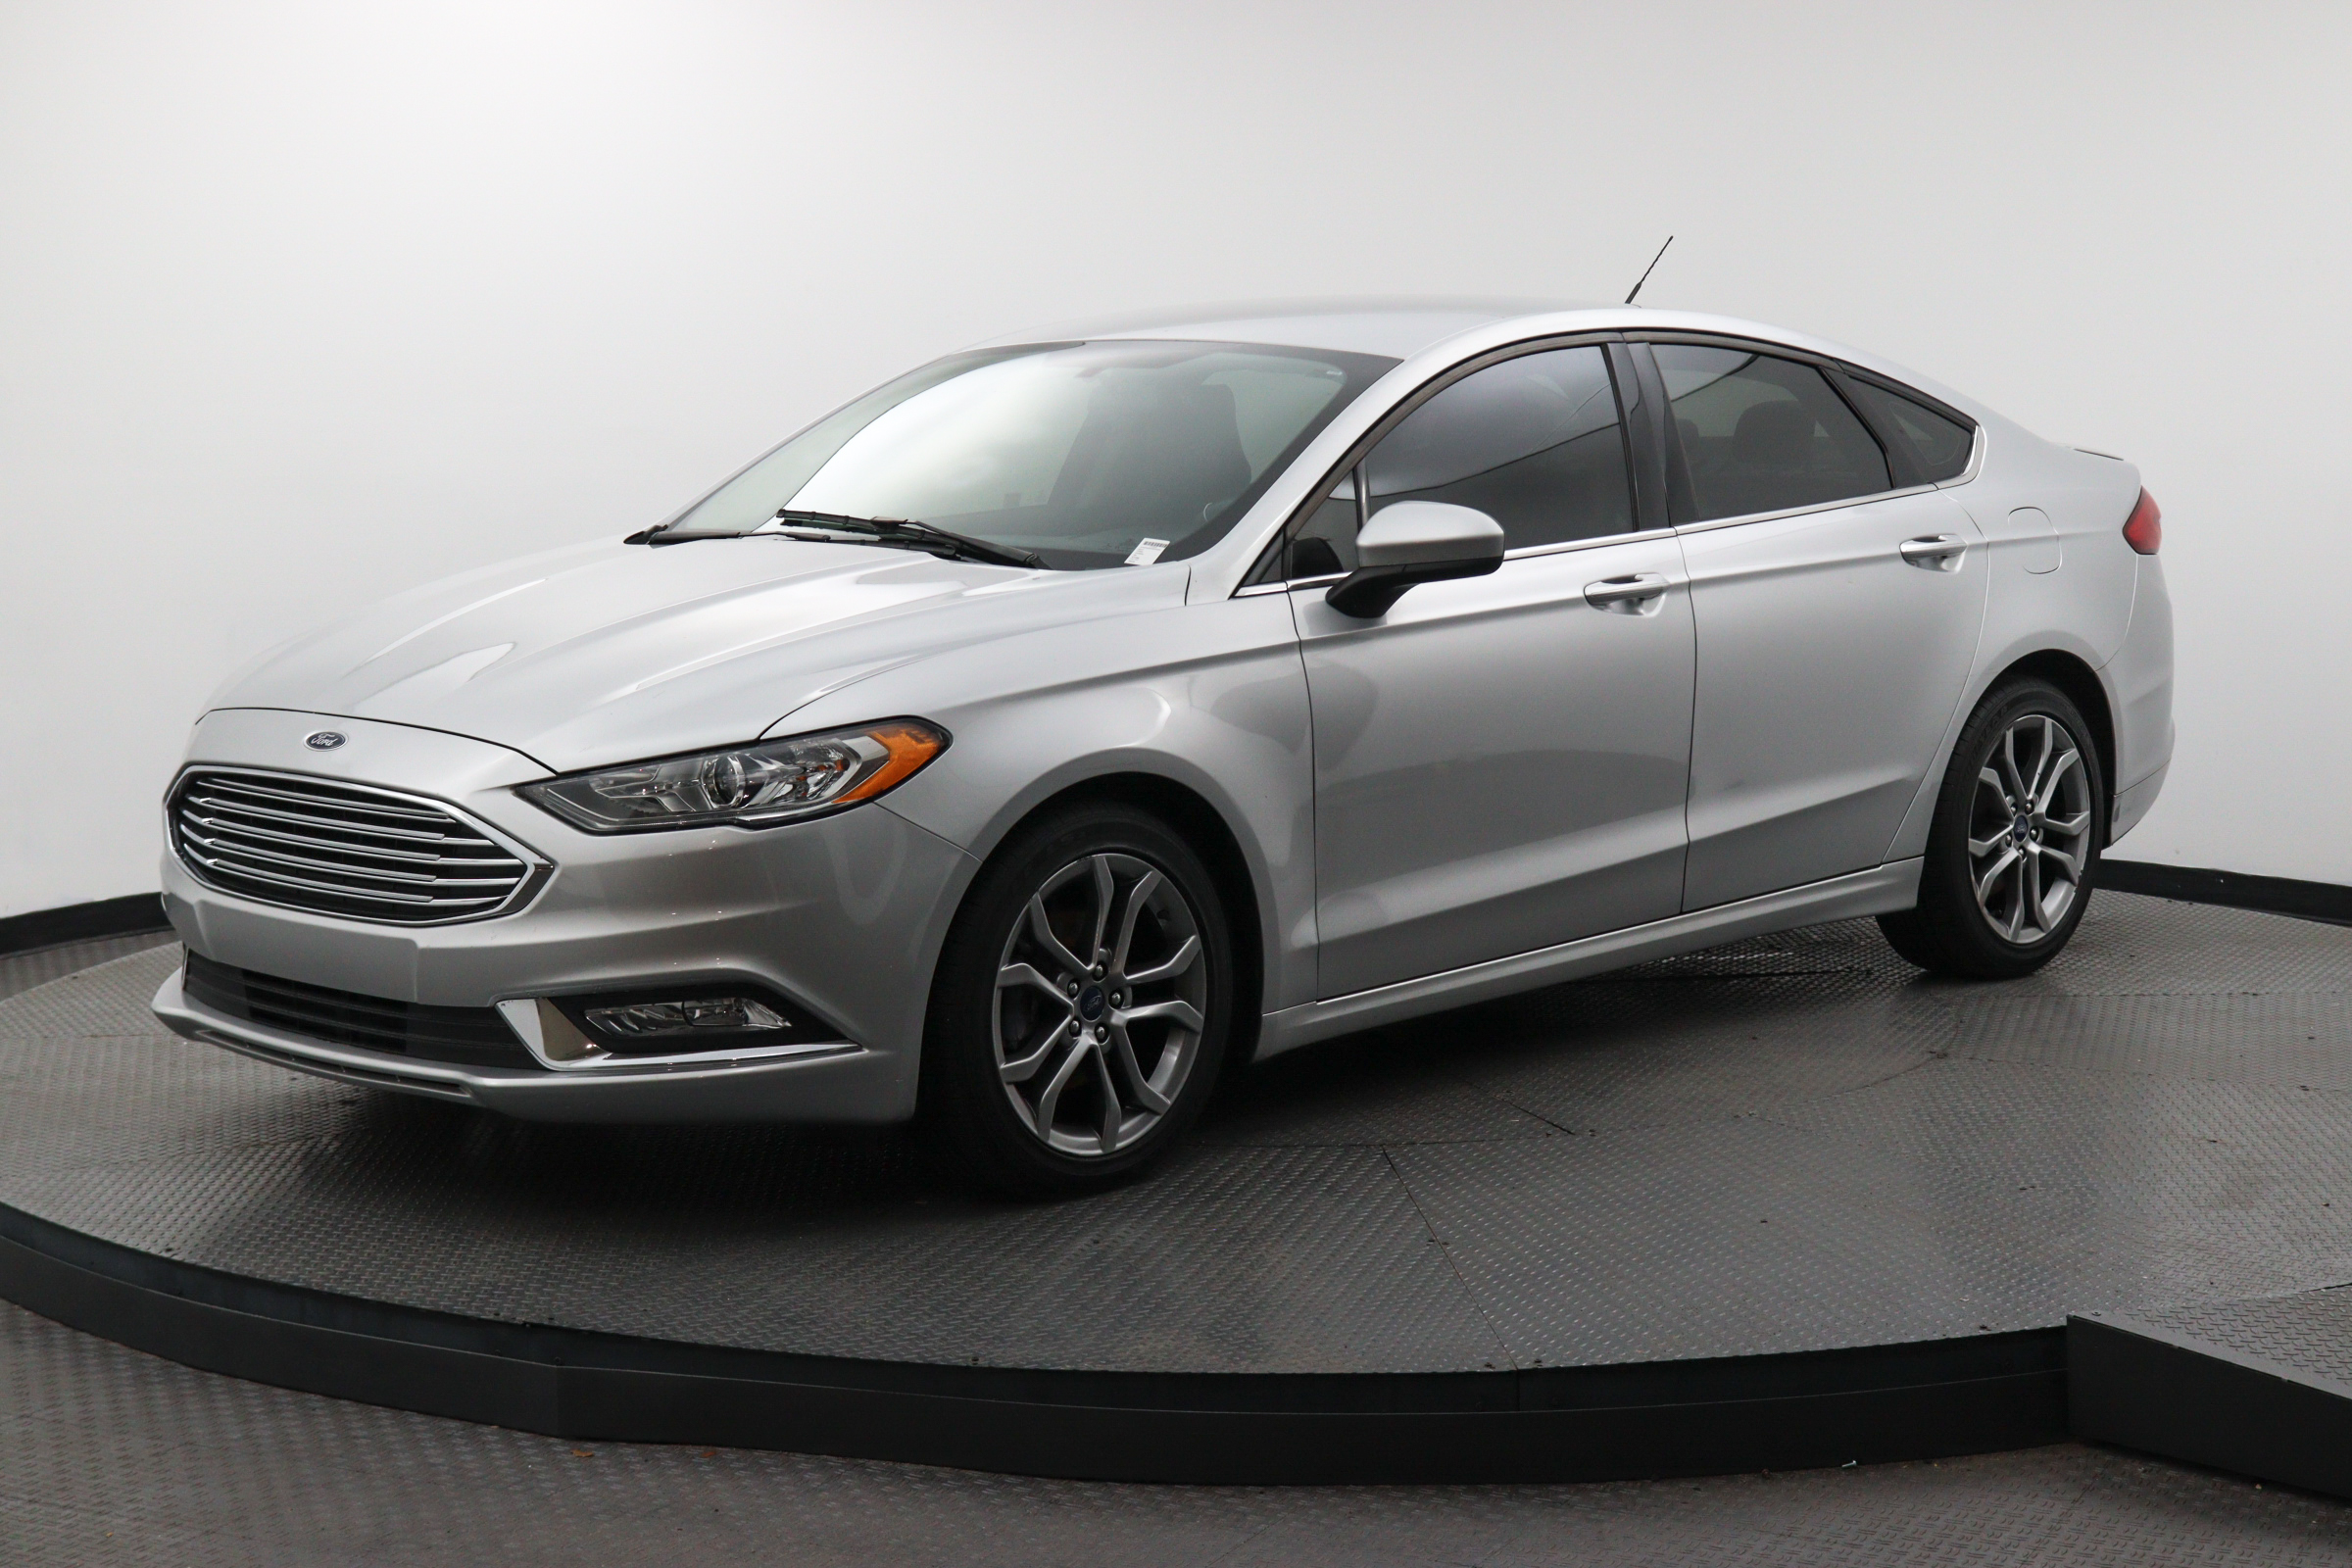 Used 2017 FORD FUSION SE for sale in MARGATE | 123392